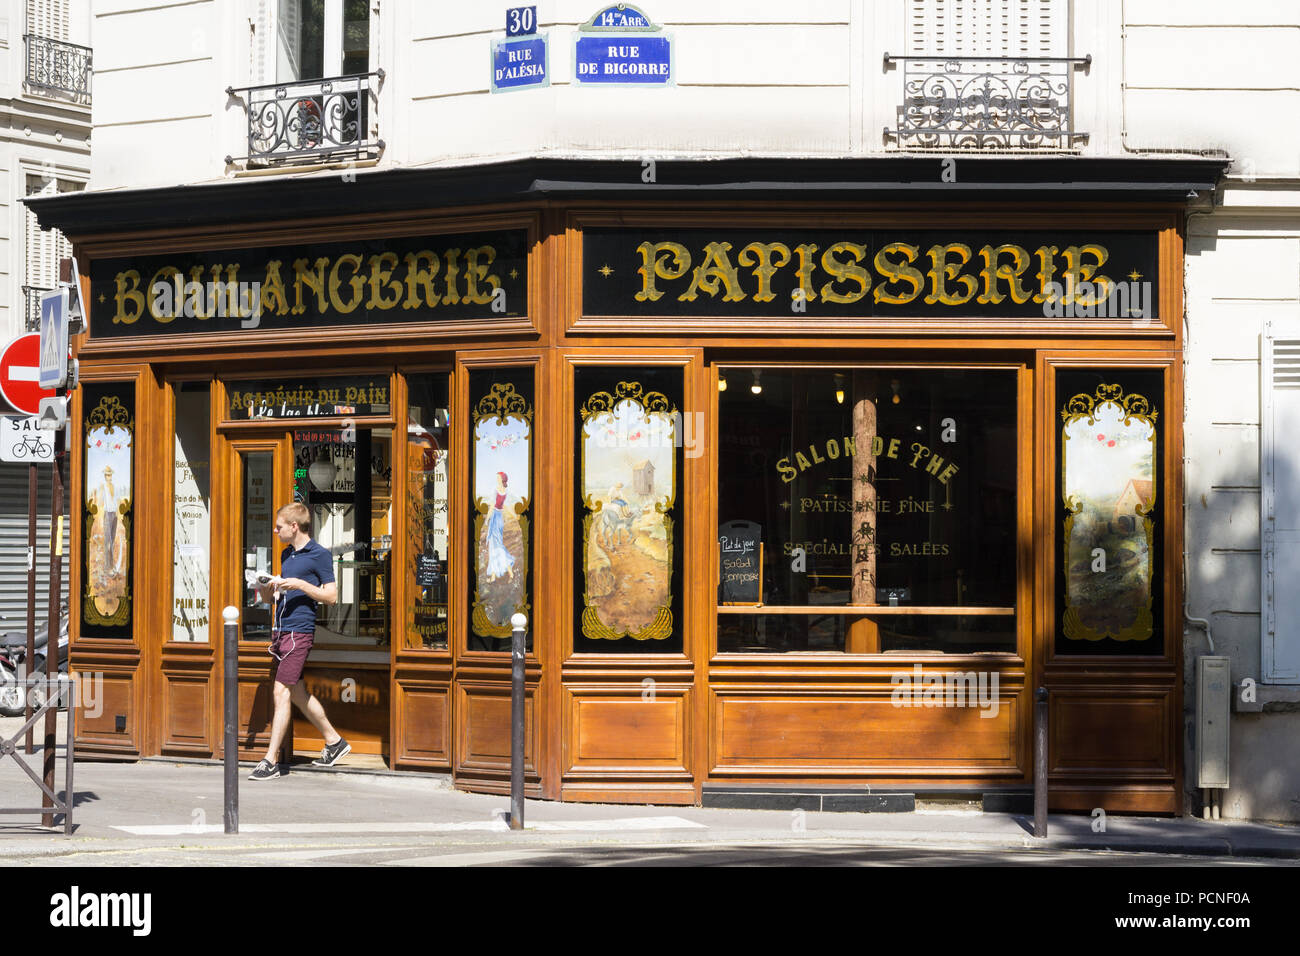 Patisserie Bakery Shop in St. Germain, Paris France, Front Entrance View  Editorial Image - Image of business, architecture: 69282260